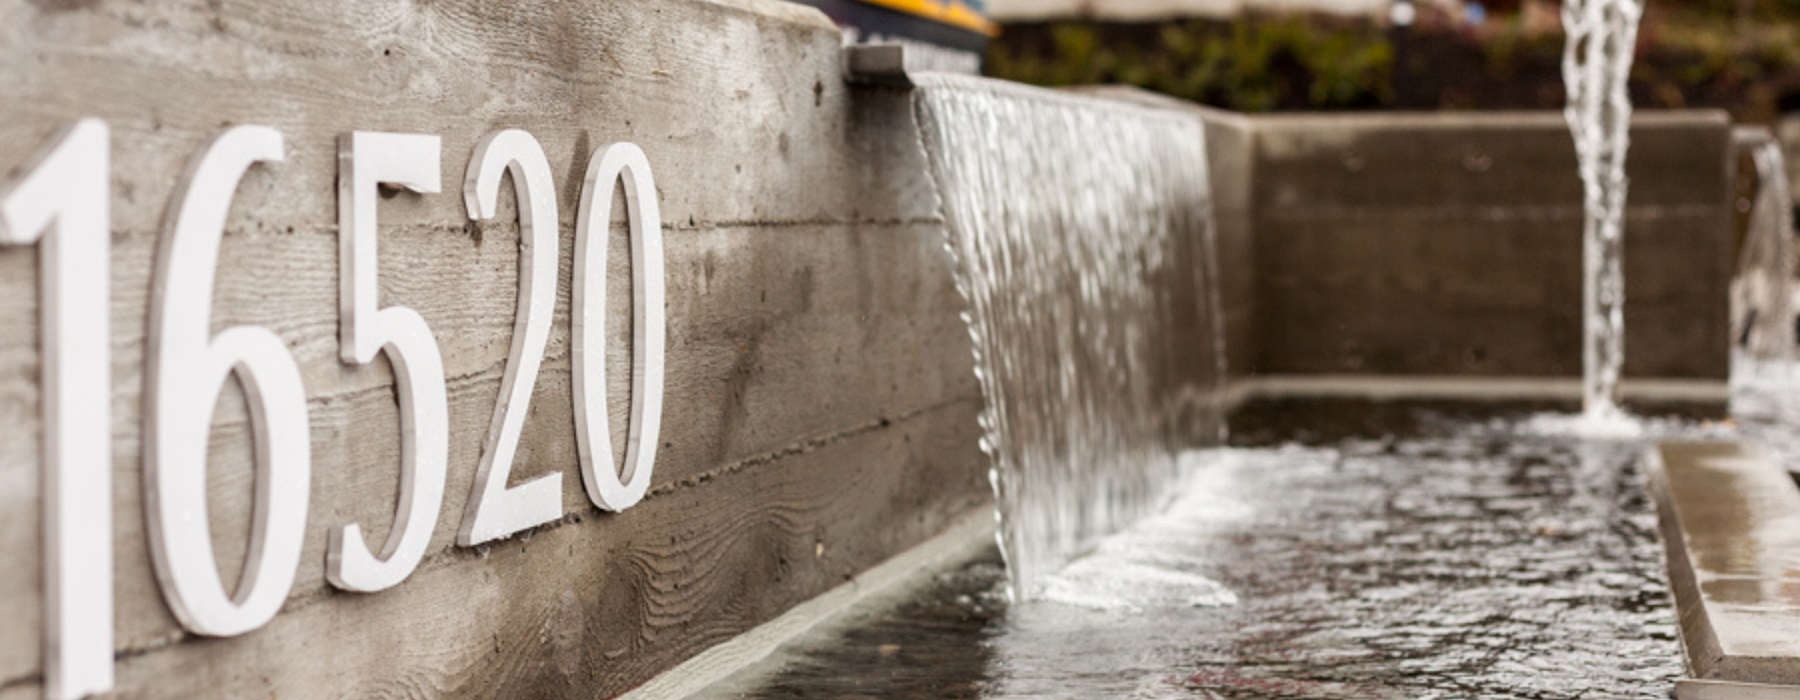 water feature with Altia address signage